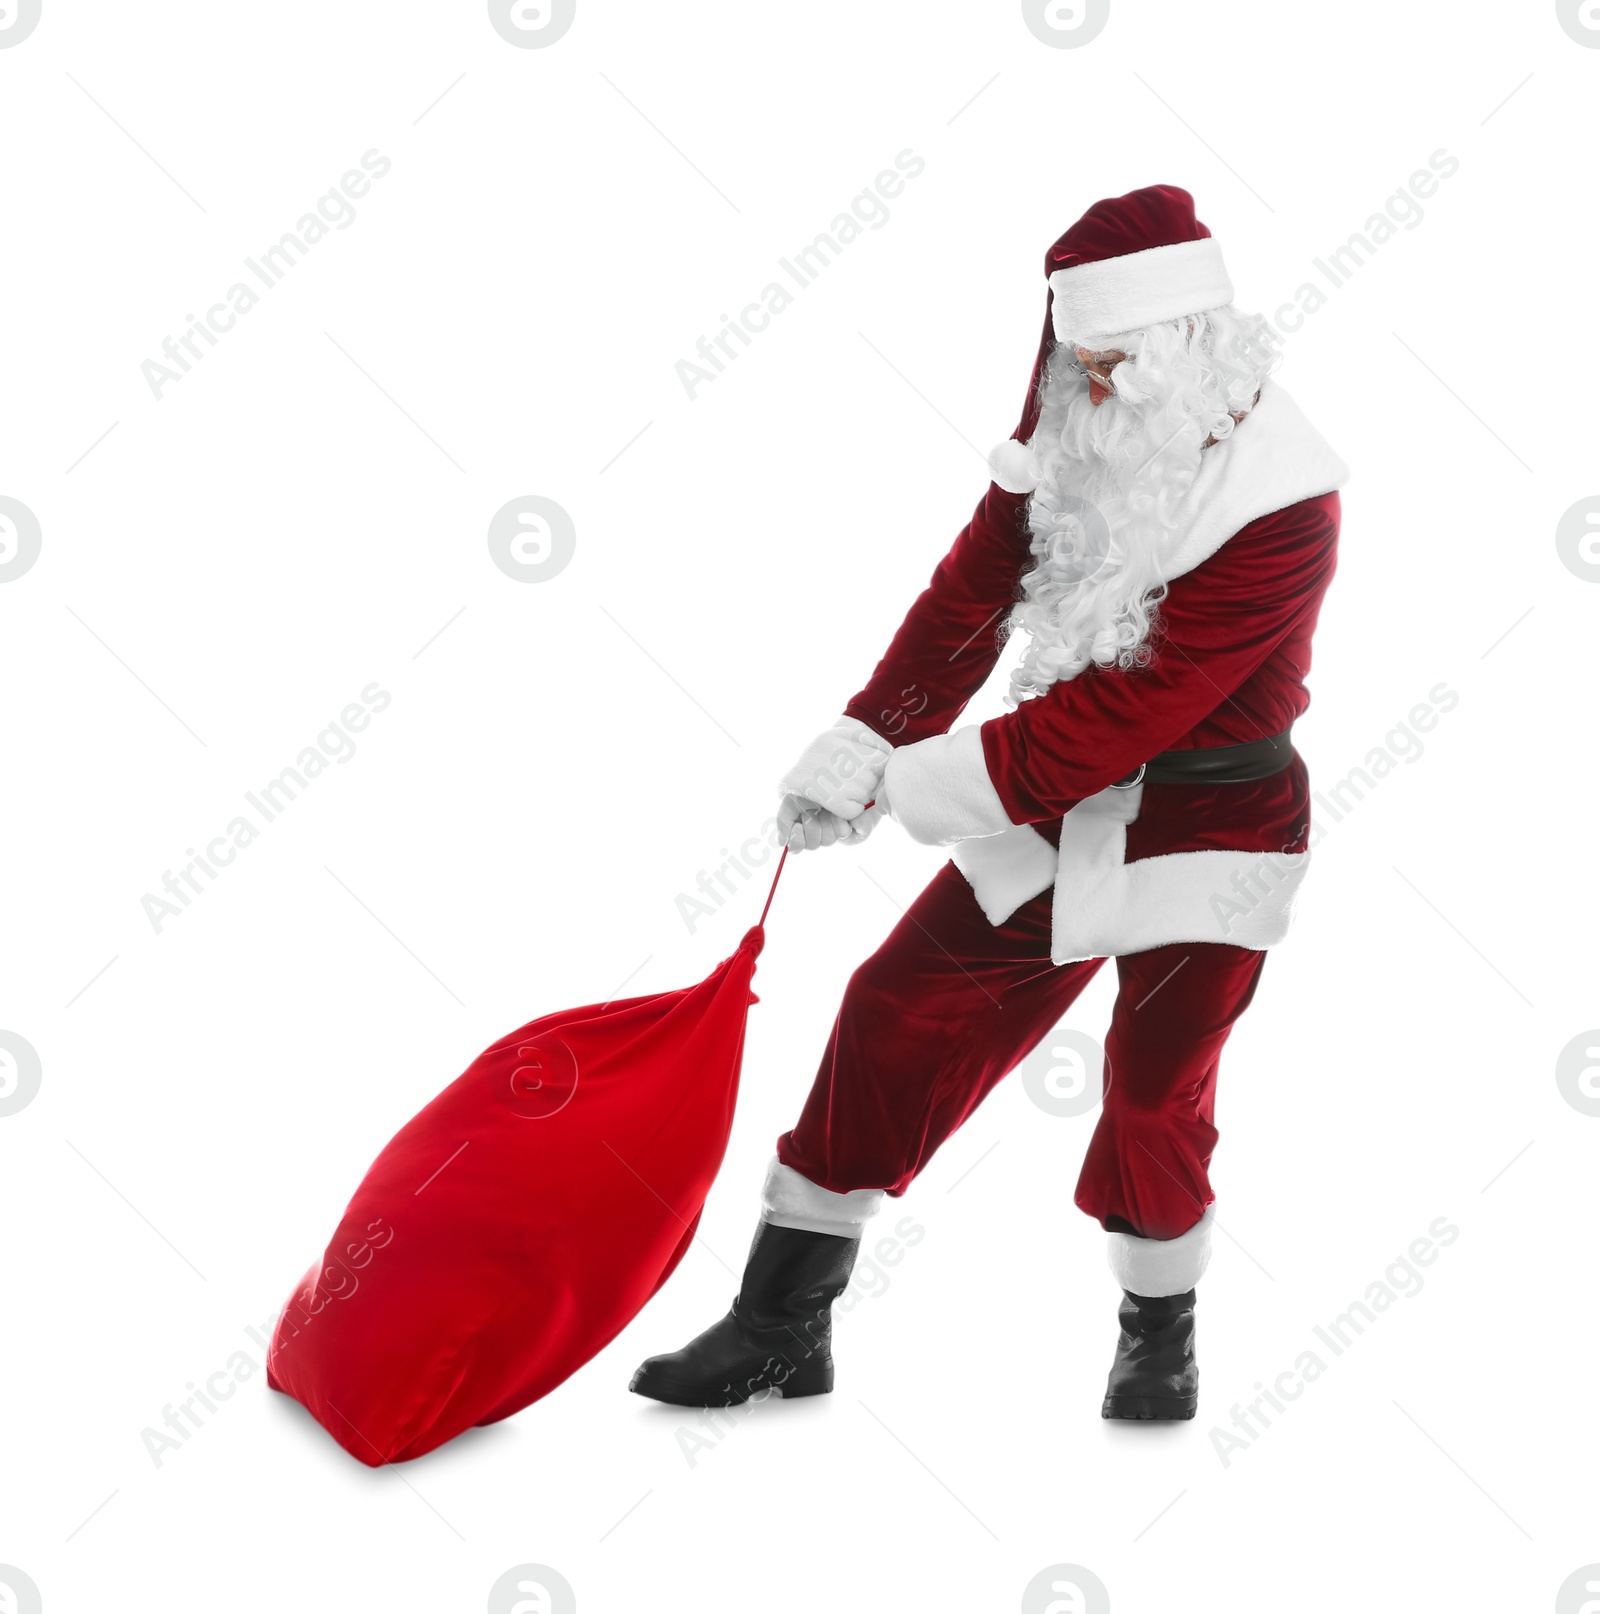 Photo of Santa Claus pulling red sack on white background